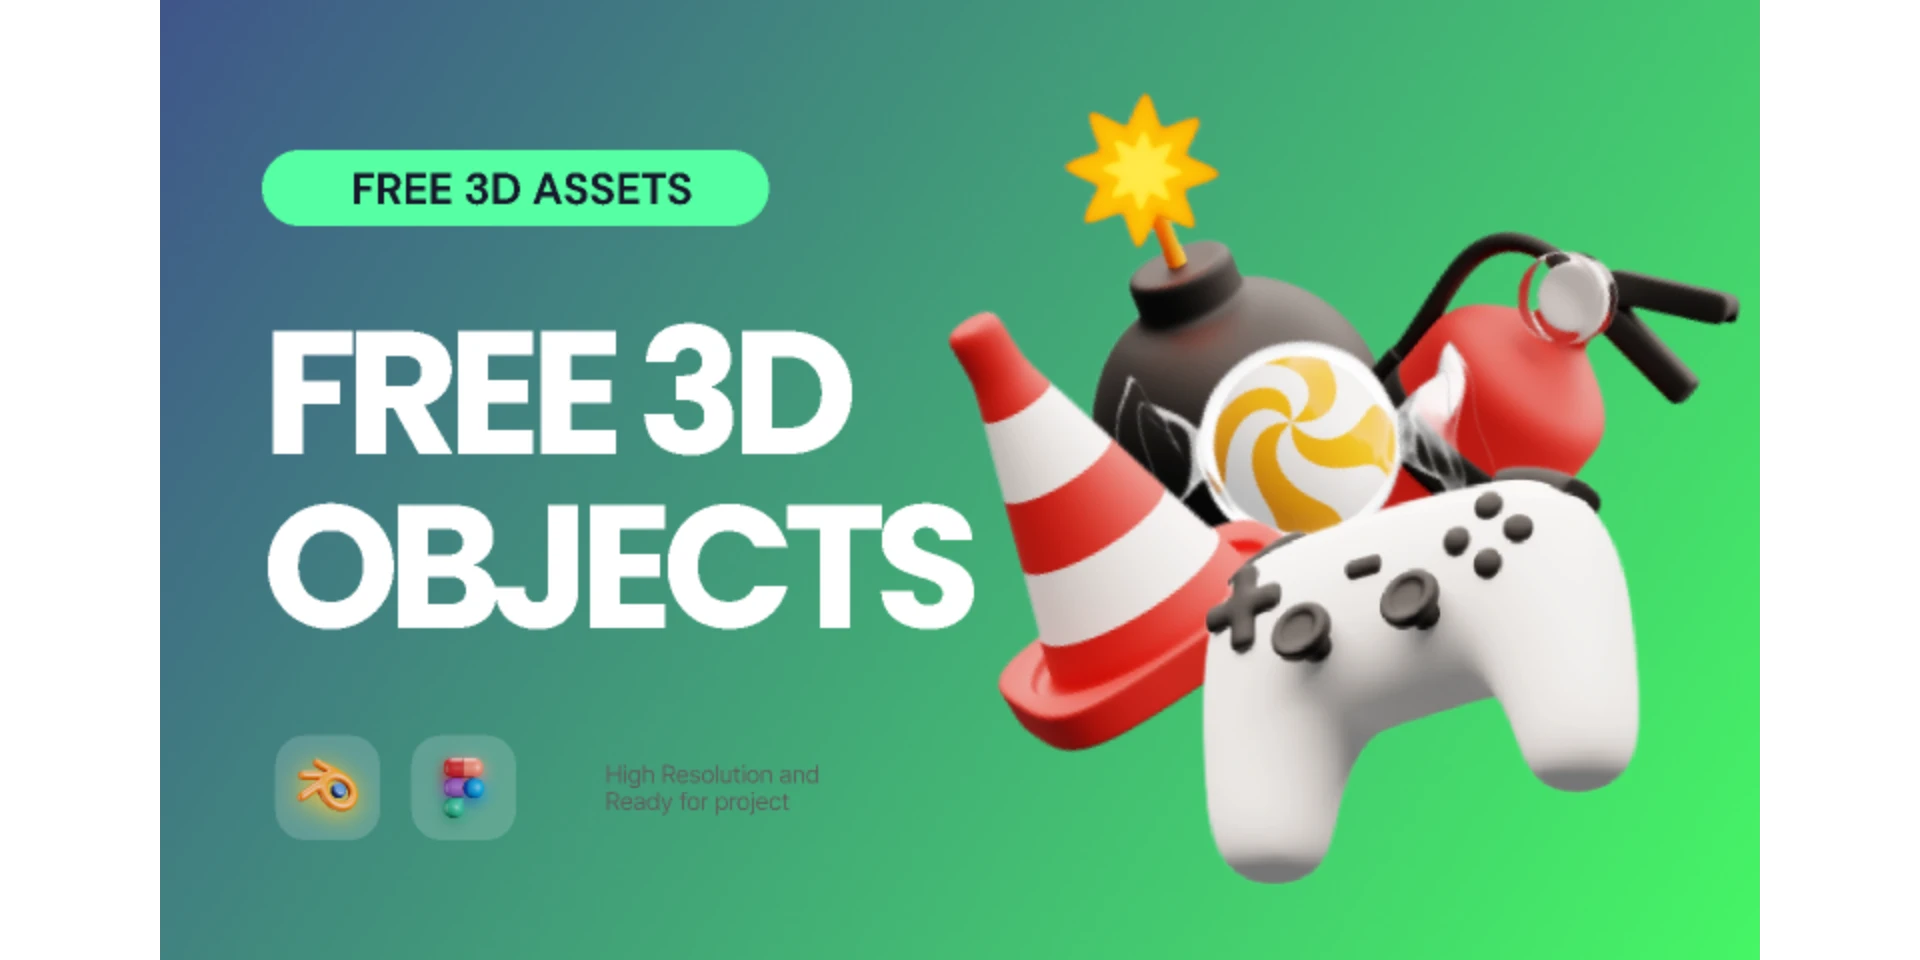 Free 3D Objcects (Part 3) for Figma and Adobe XD